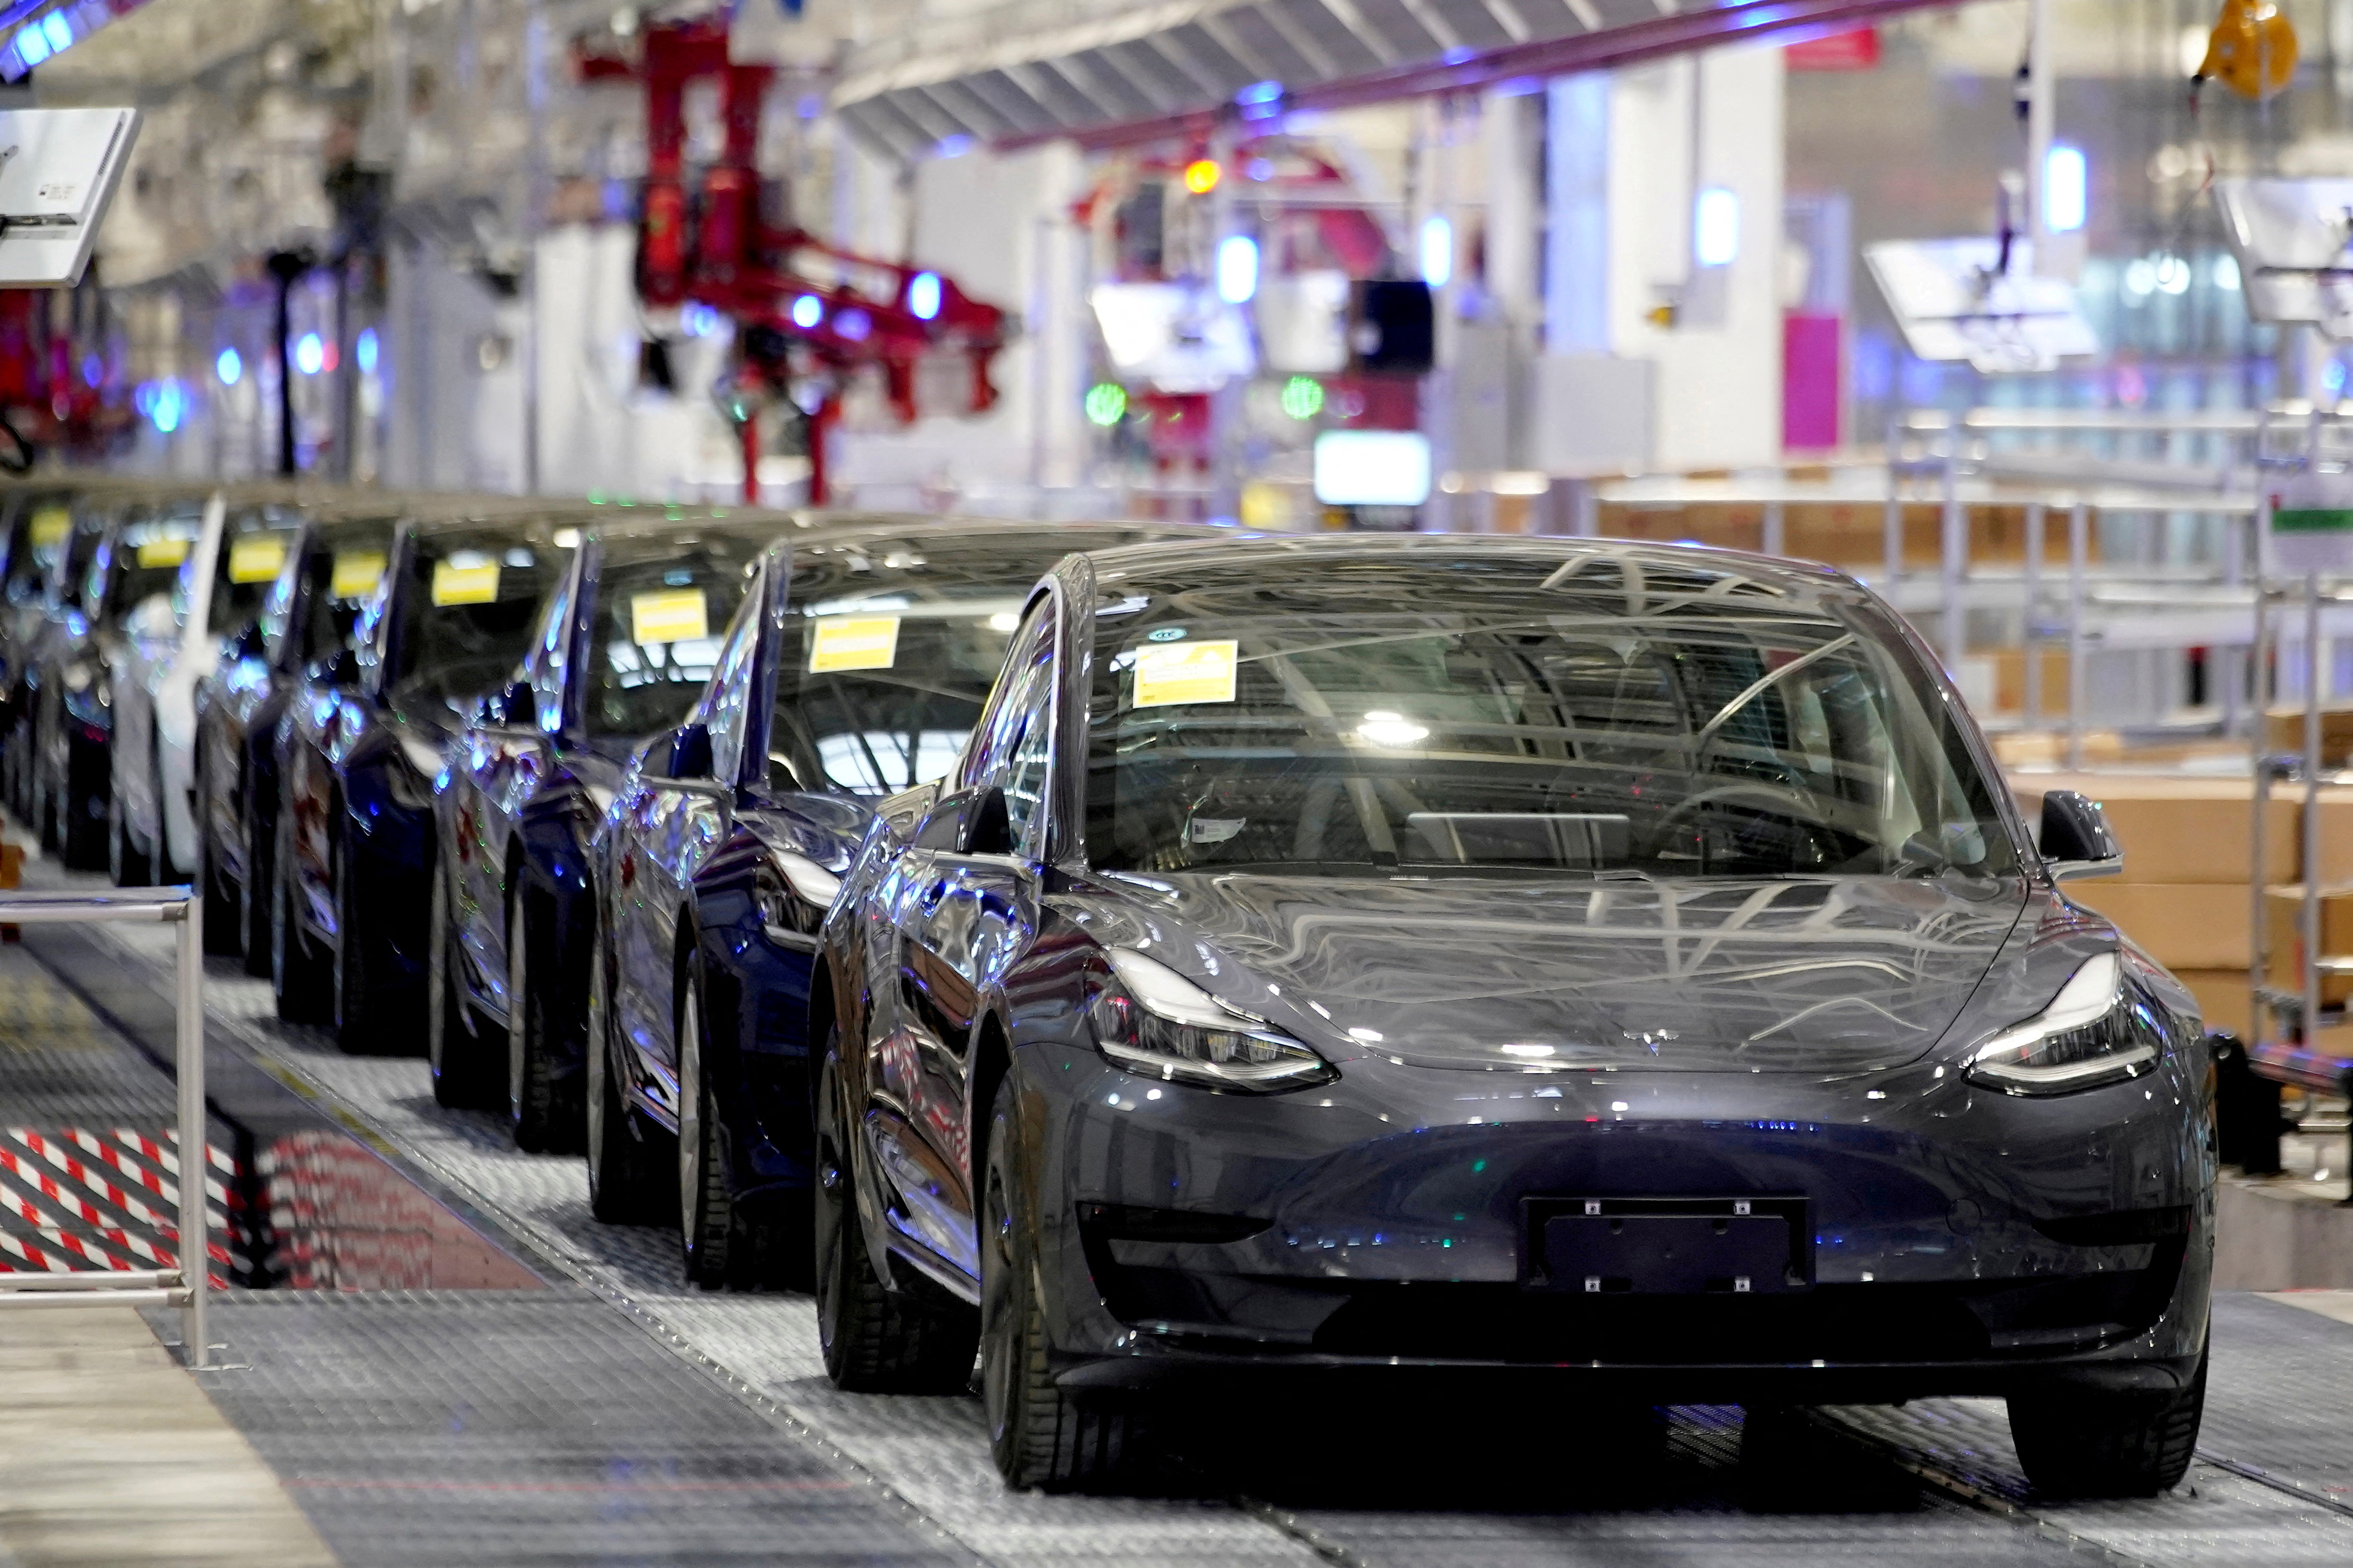 Tesla China-made Model 3 vehicles are seen during a delivery event at the carmaker's factory in Shanghai, China